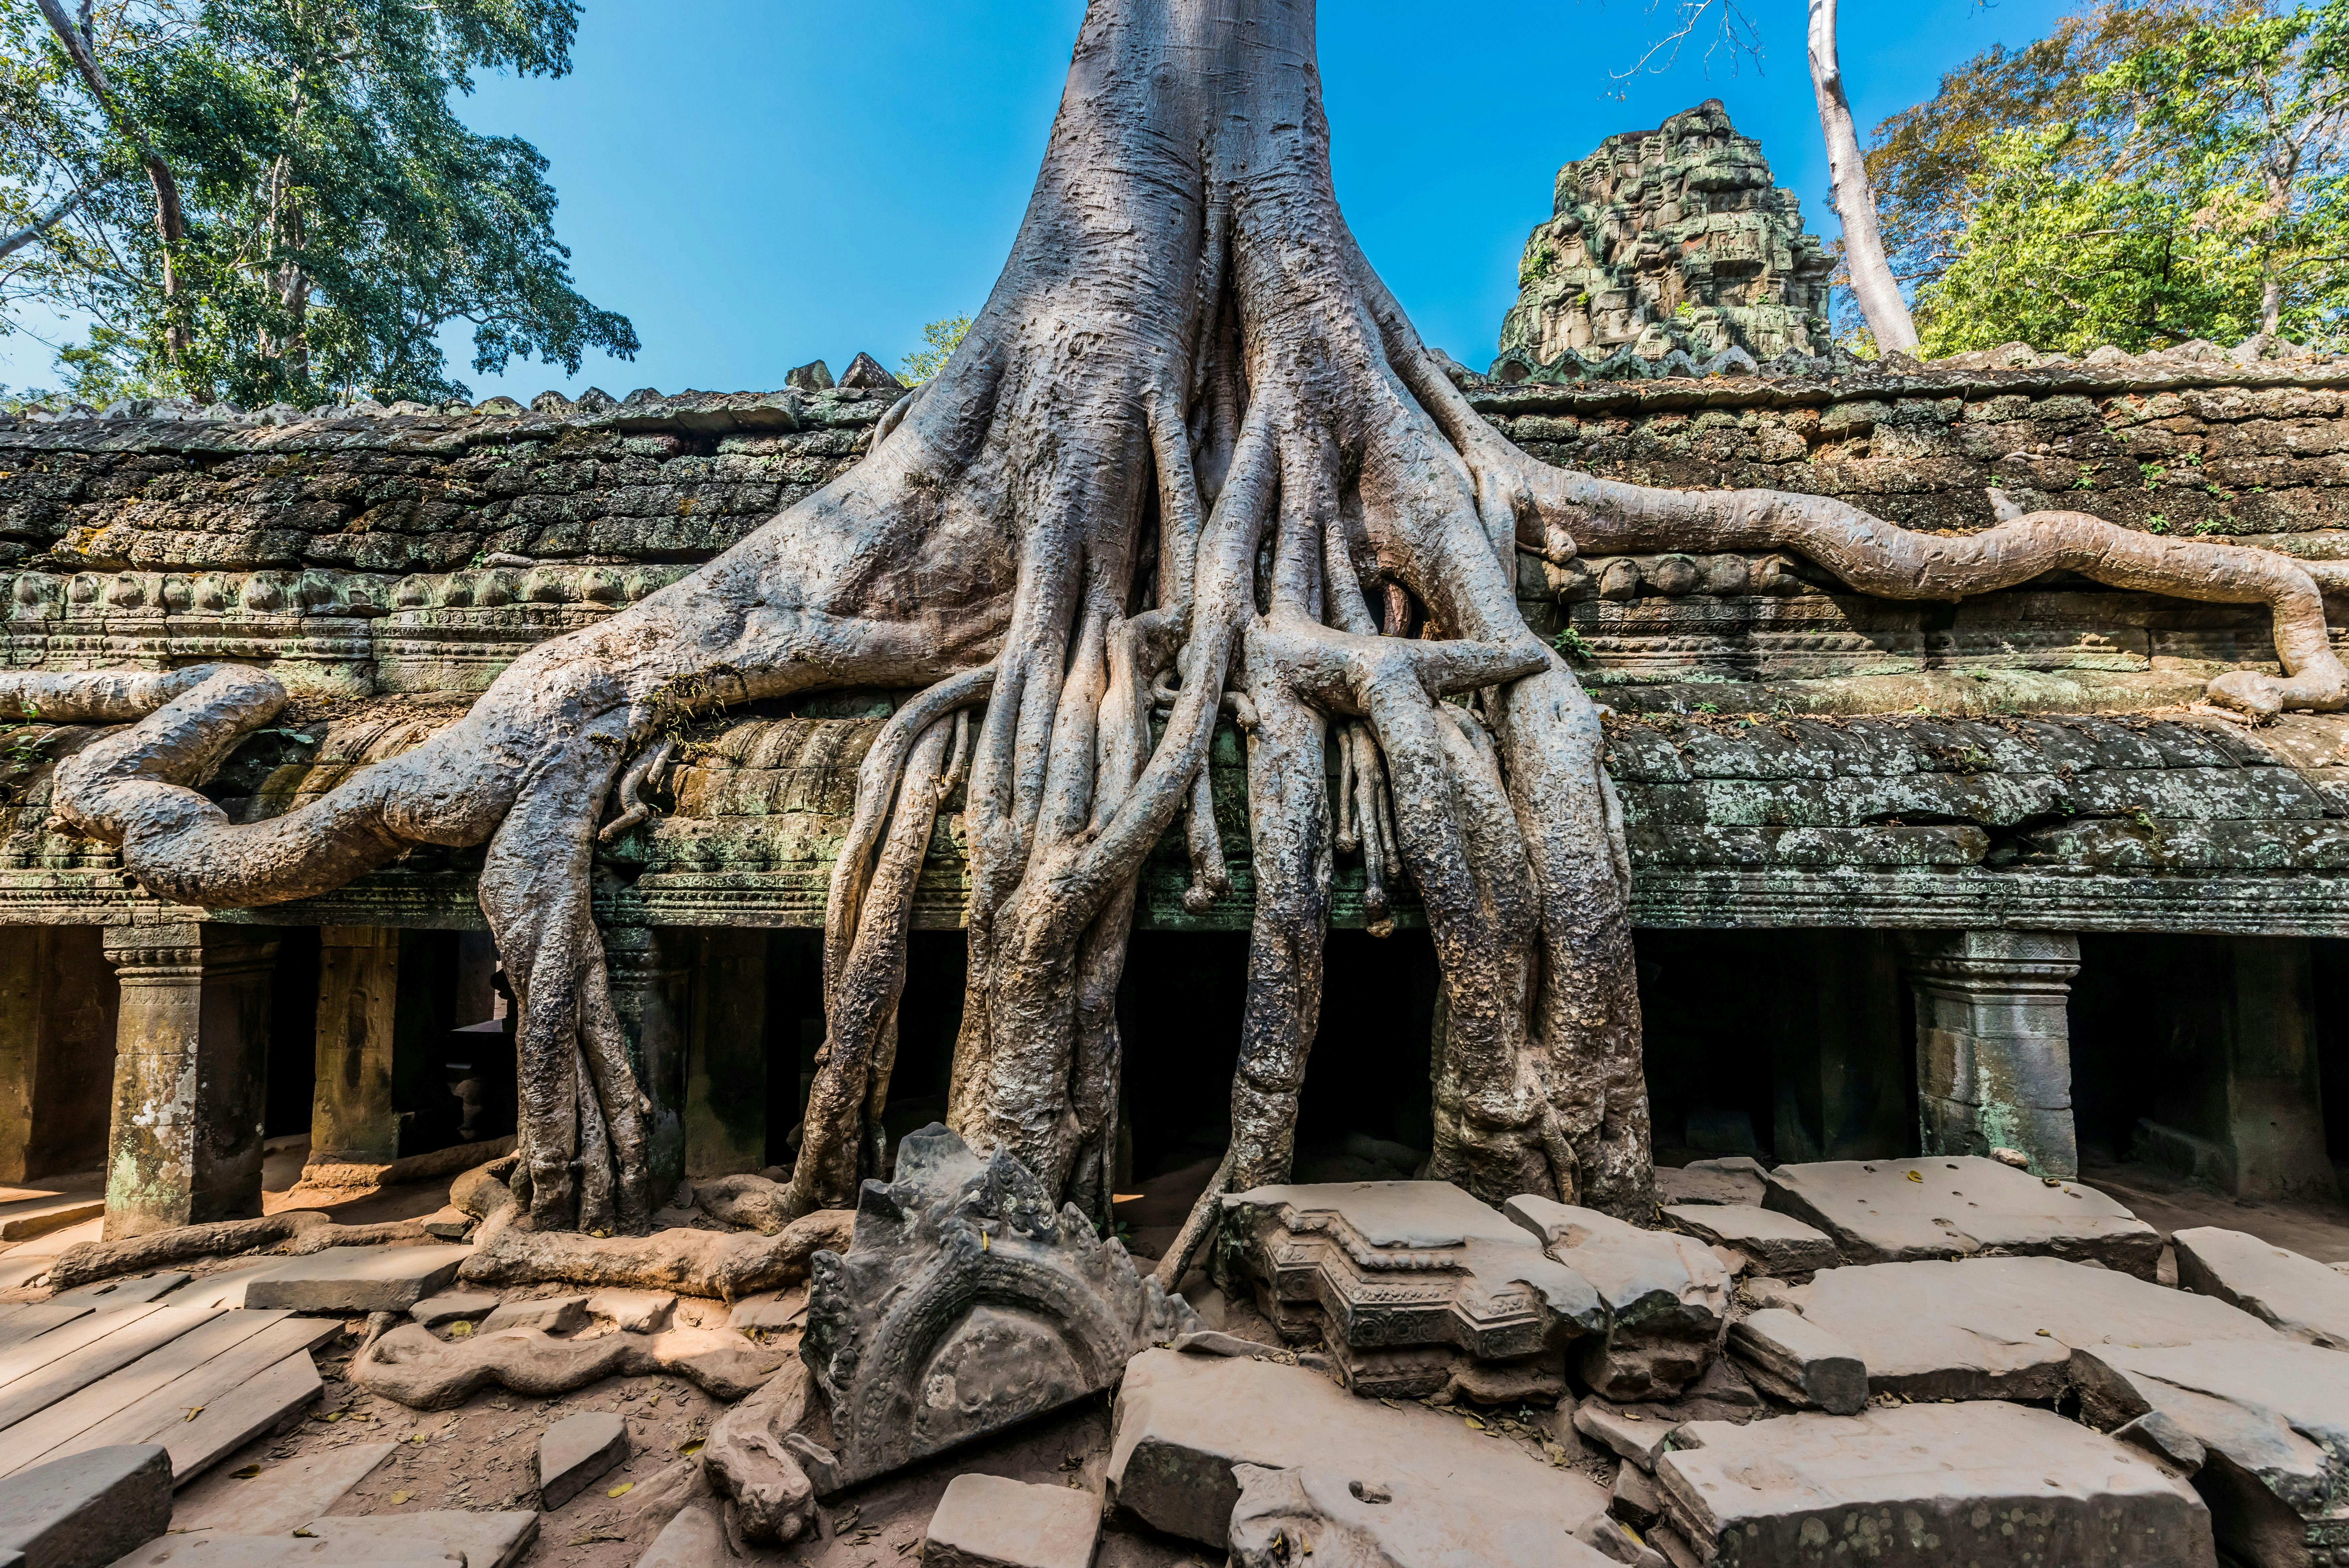 Private 2-day temples the best historical of Khmer Empire tour